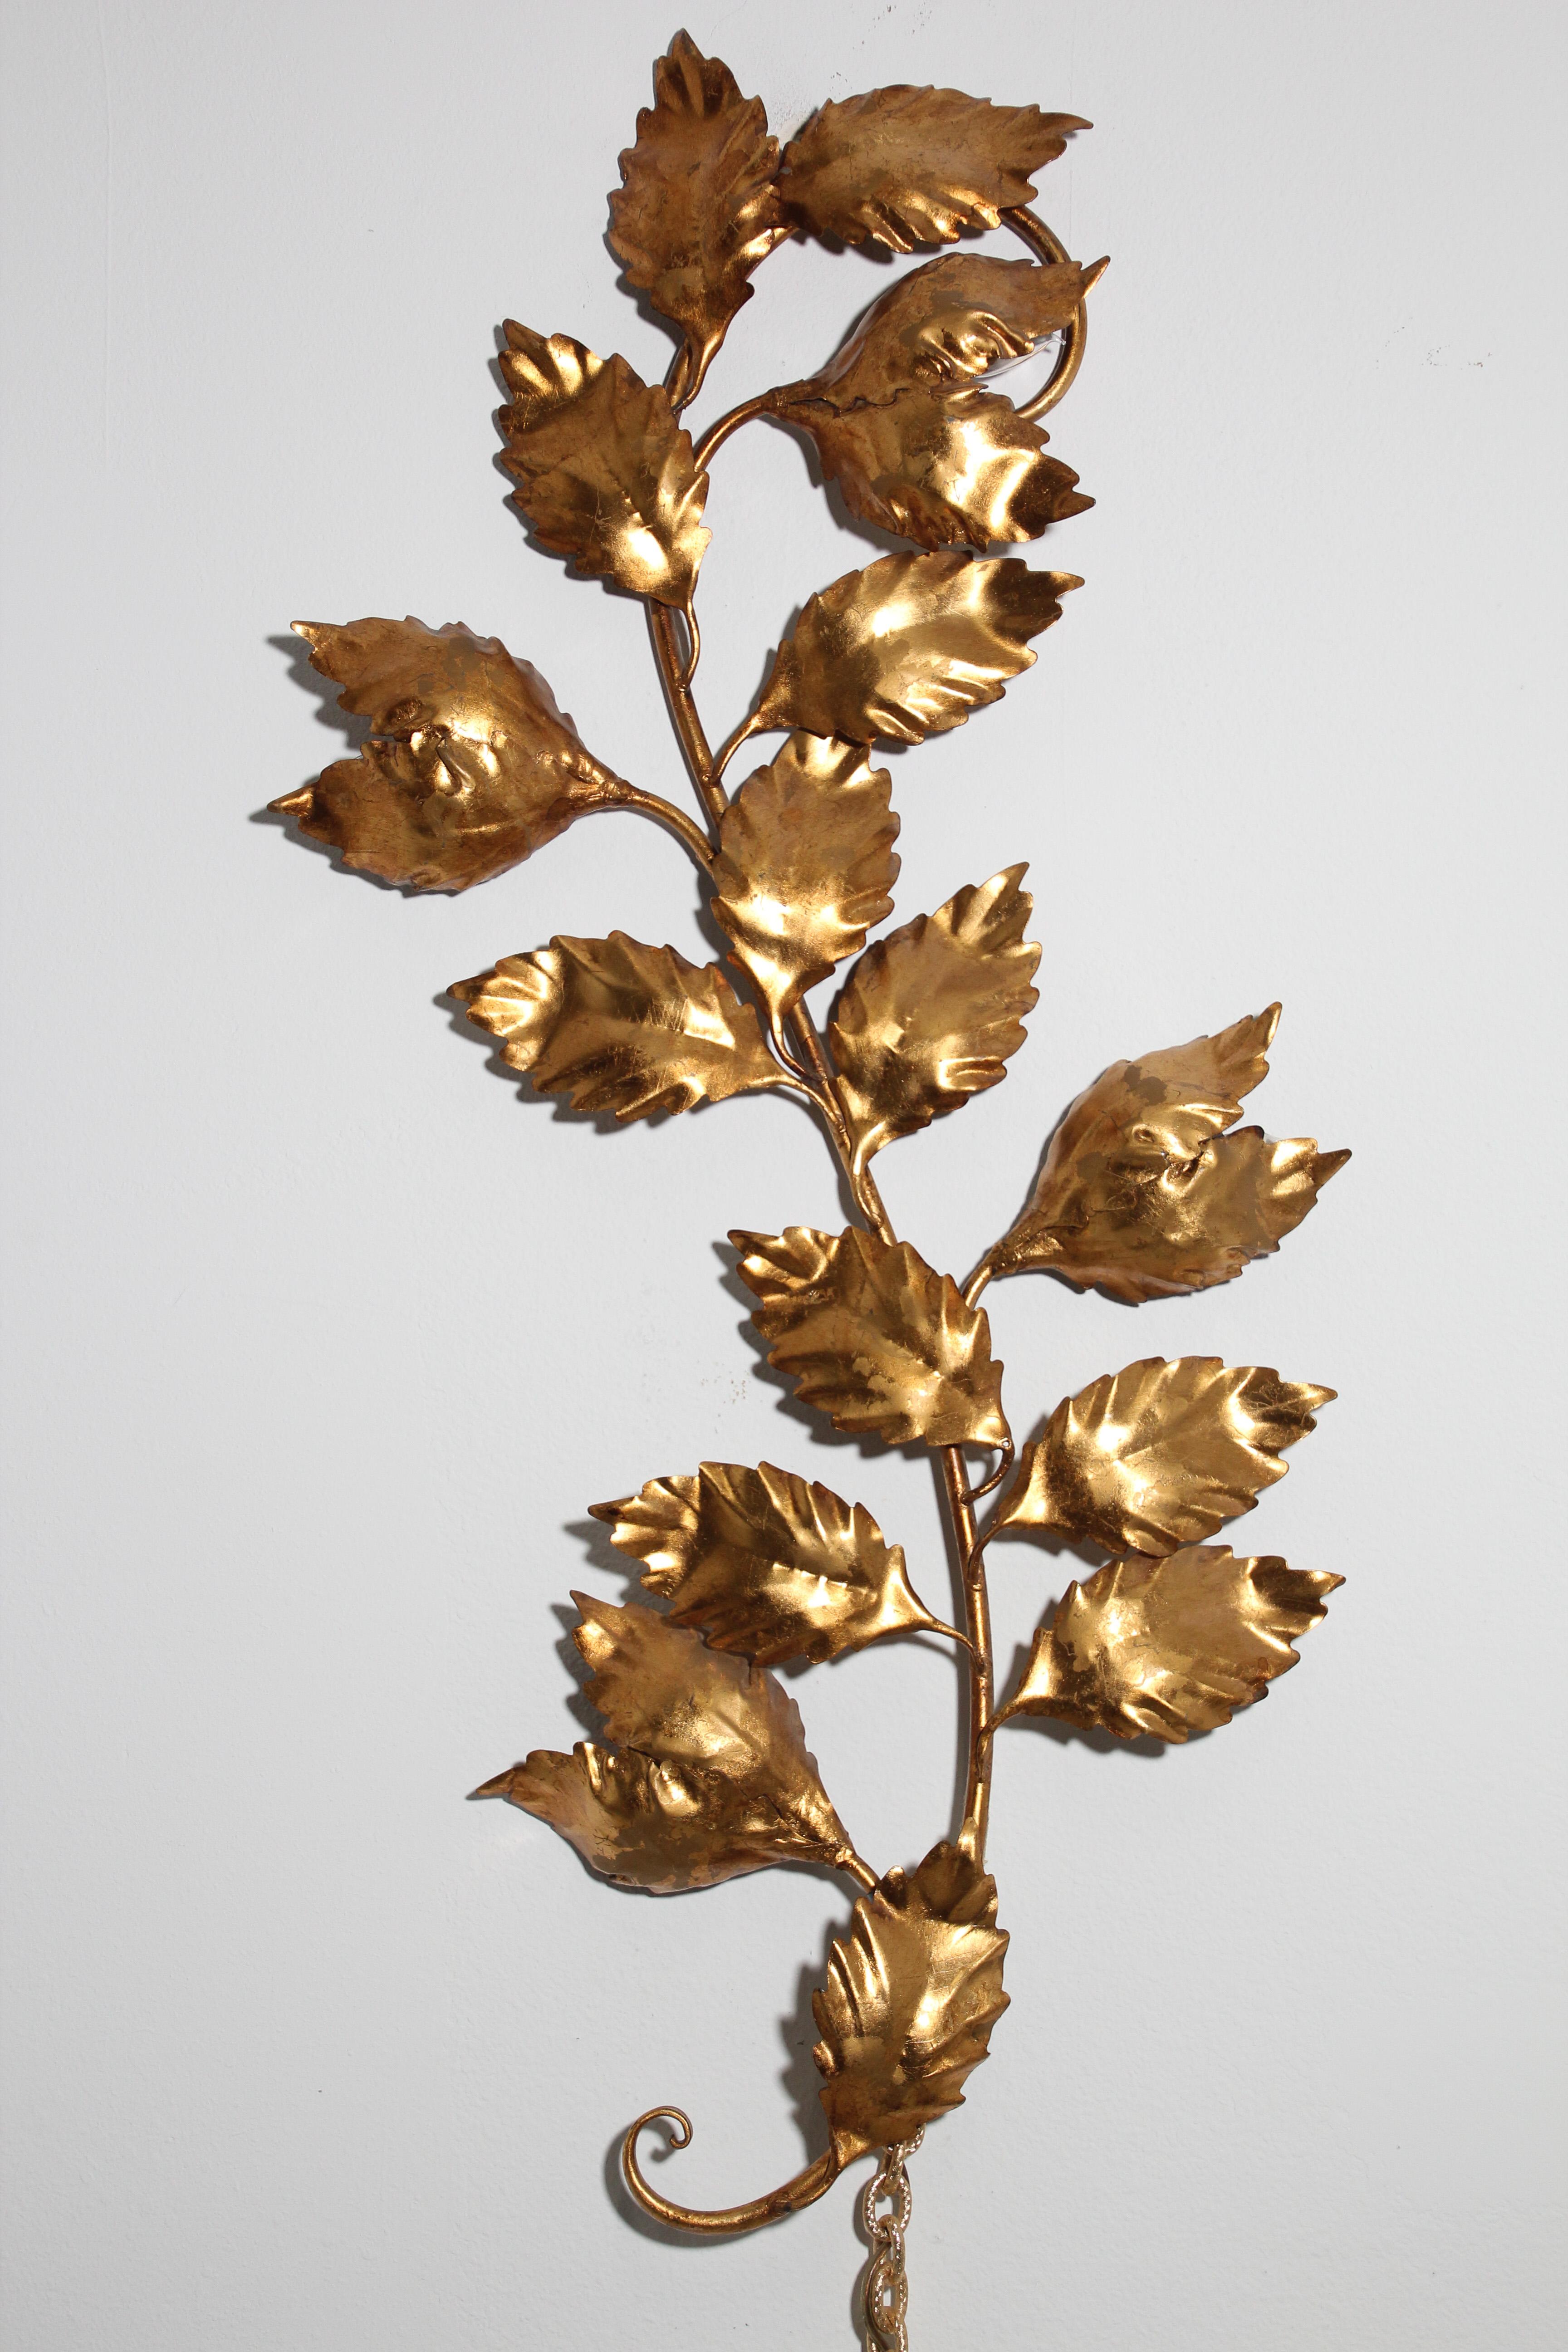 An Italian 1960s Hollywood Regency gilt metal wall sconce in the form of a branch with leaves.
This large decorative gold leaf sconce makes an ideal feature piece for a traditional or contemporary interior, perhaps over a sofa, fireplace, bed or any